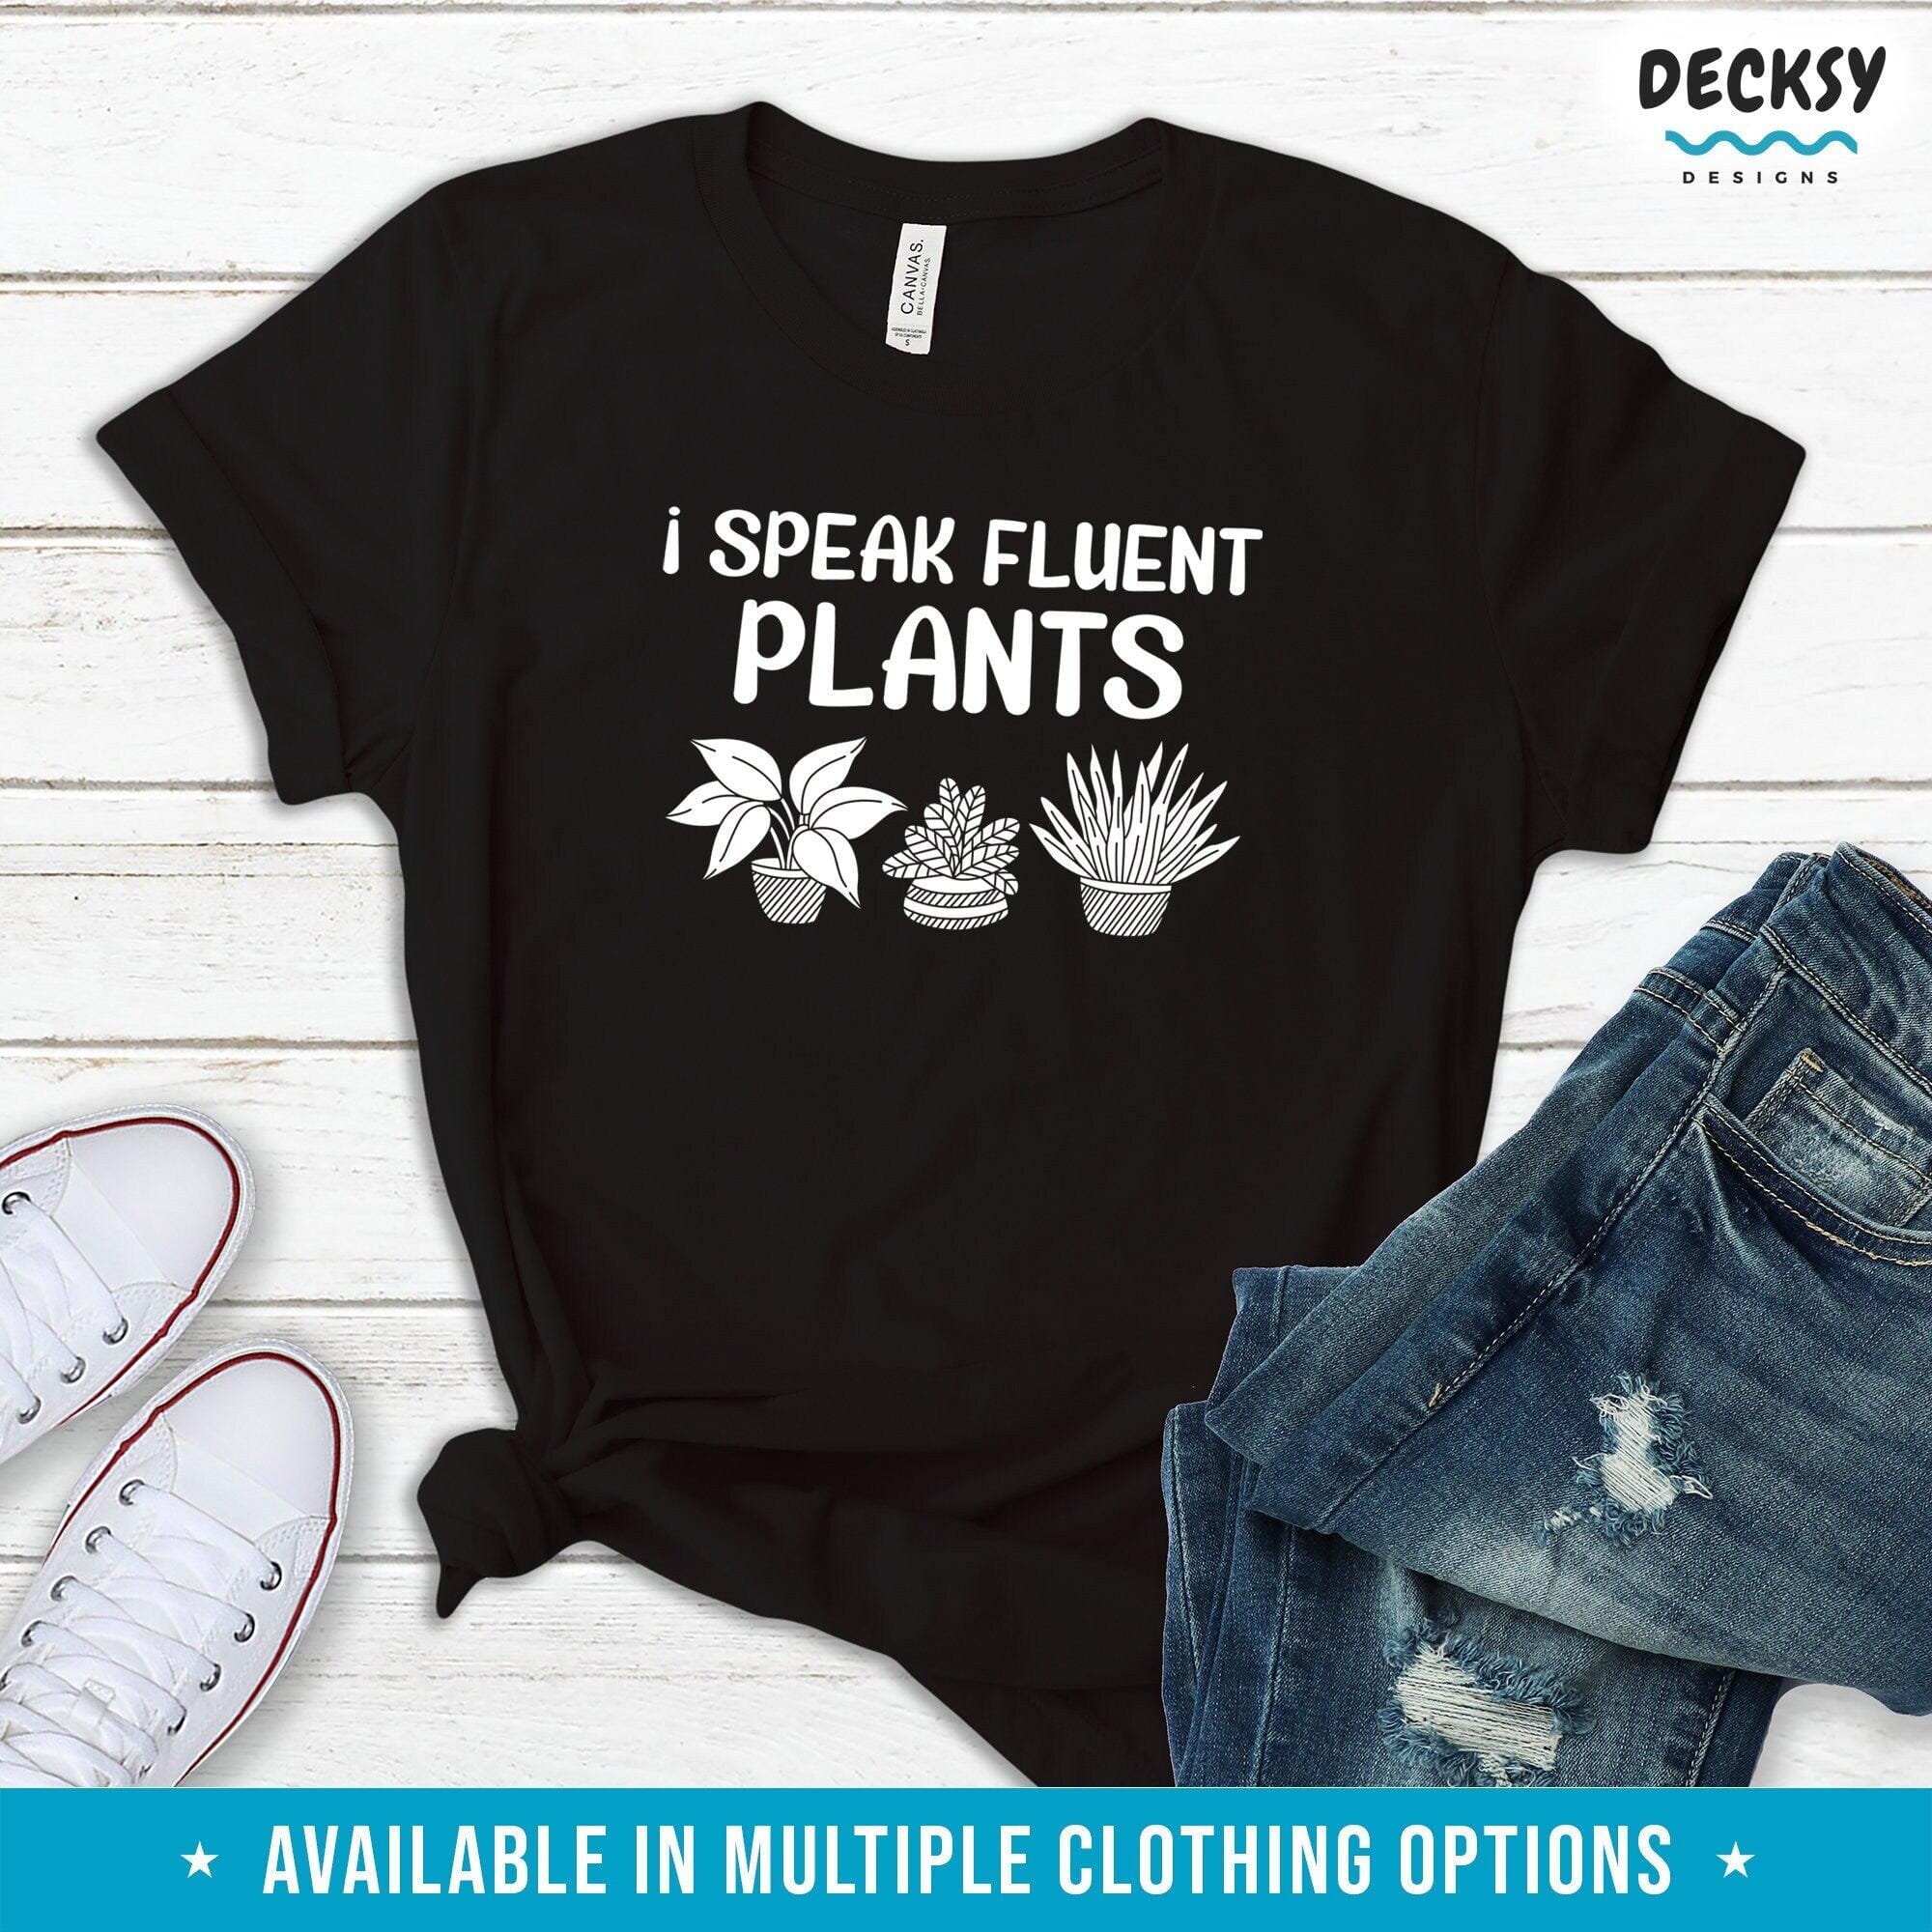 Gardening Shirt, Plant Lover Gift-Clothing:Gender-Neutral Adult Clothing:Tops & Tees:T-shirts:Graphic Tees-DecksyDesigns